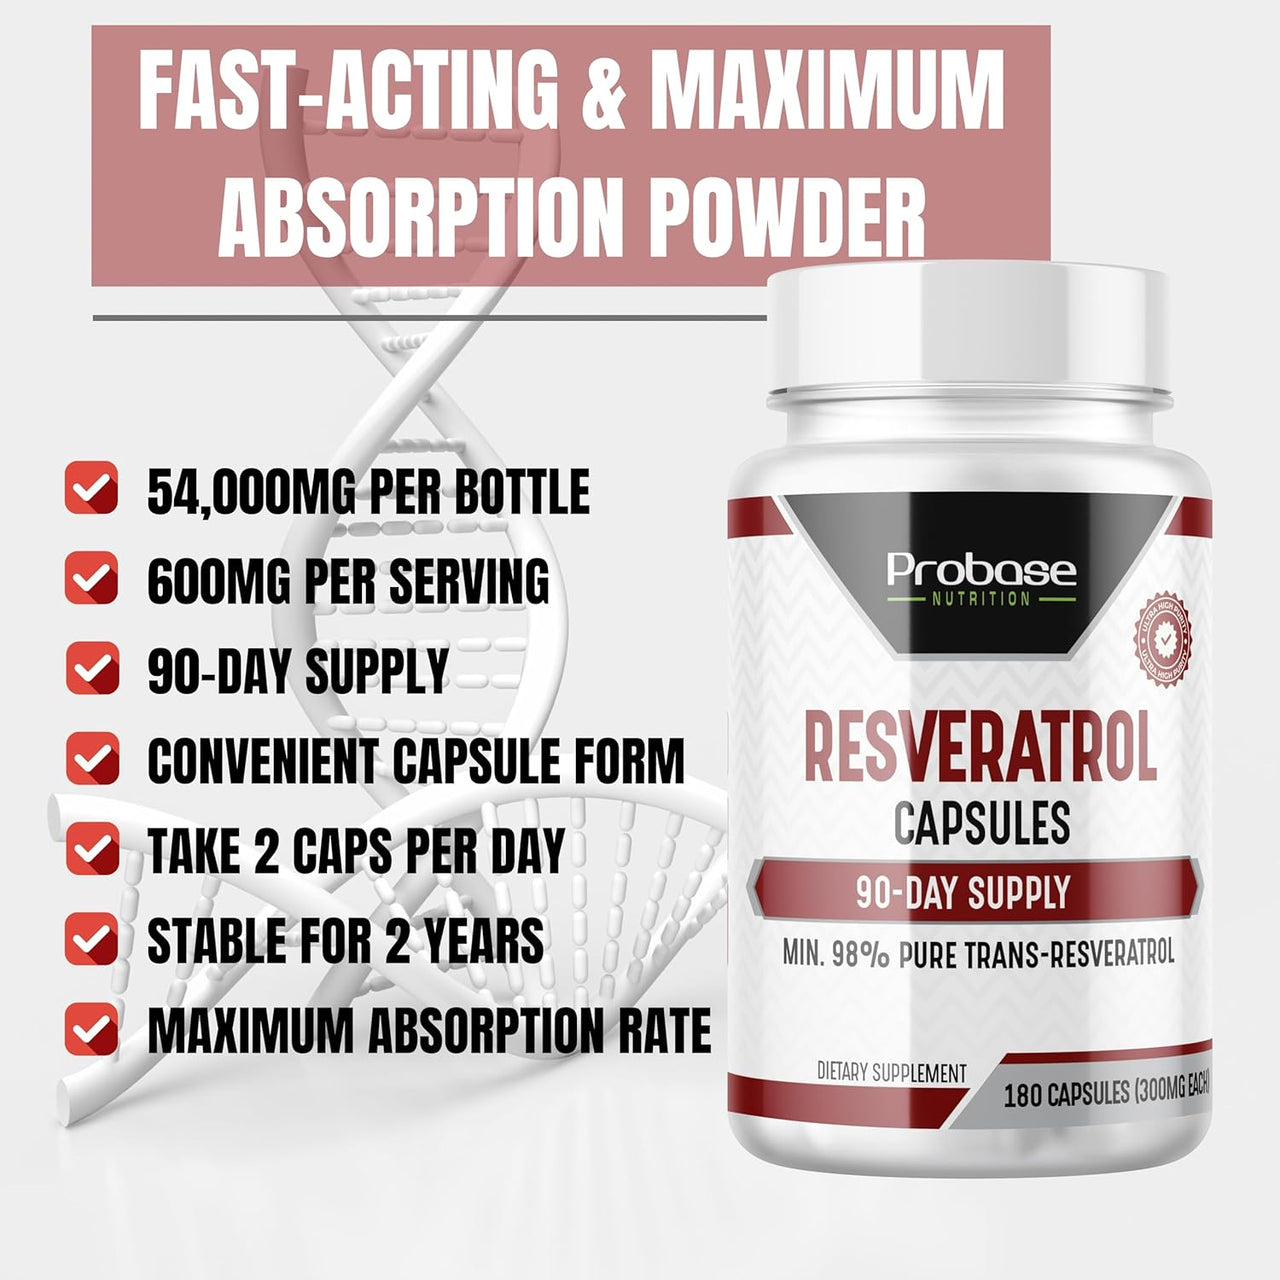 Probase Nutrition Ultra High Purity Resveratrol Capsules - 98% Trans-Resveratrol - 180 Caps Resveratrol Supplement